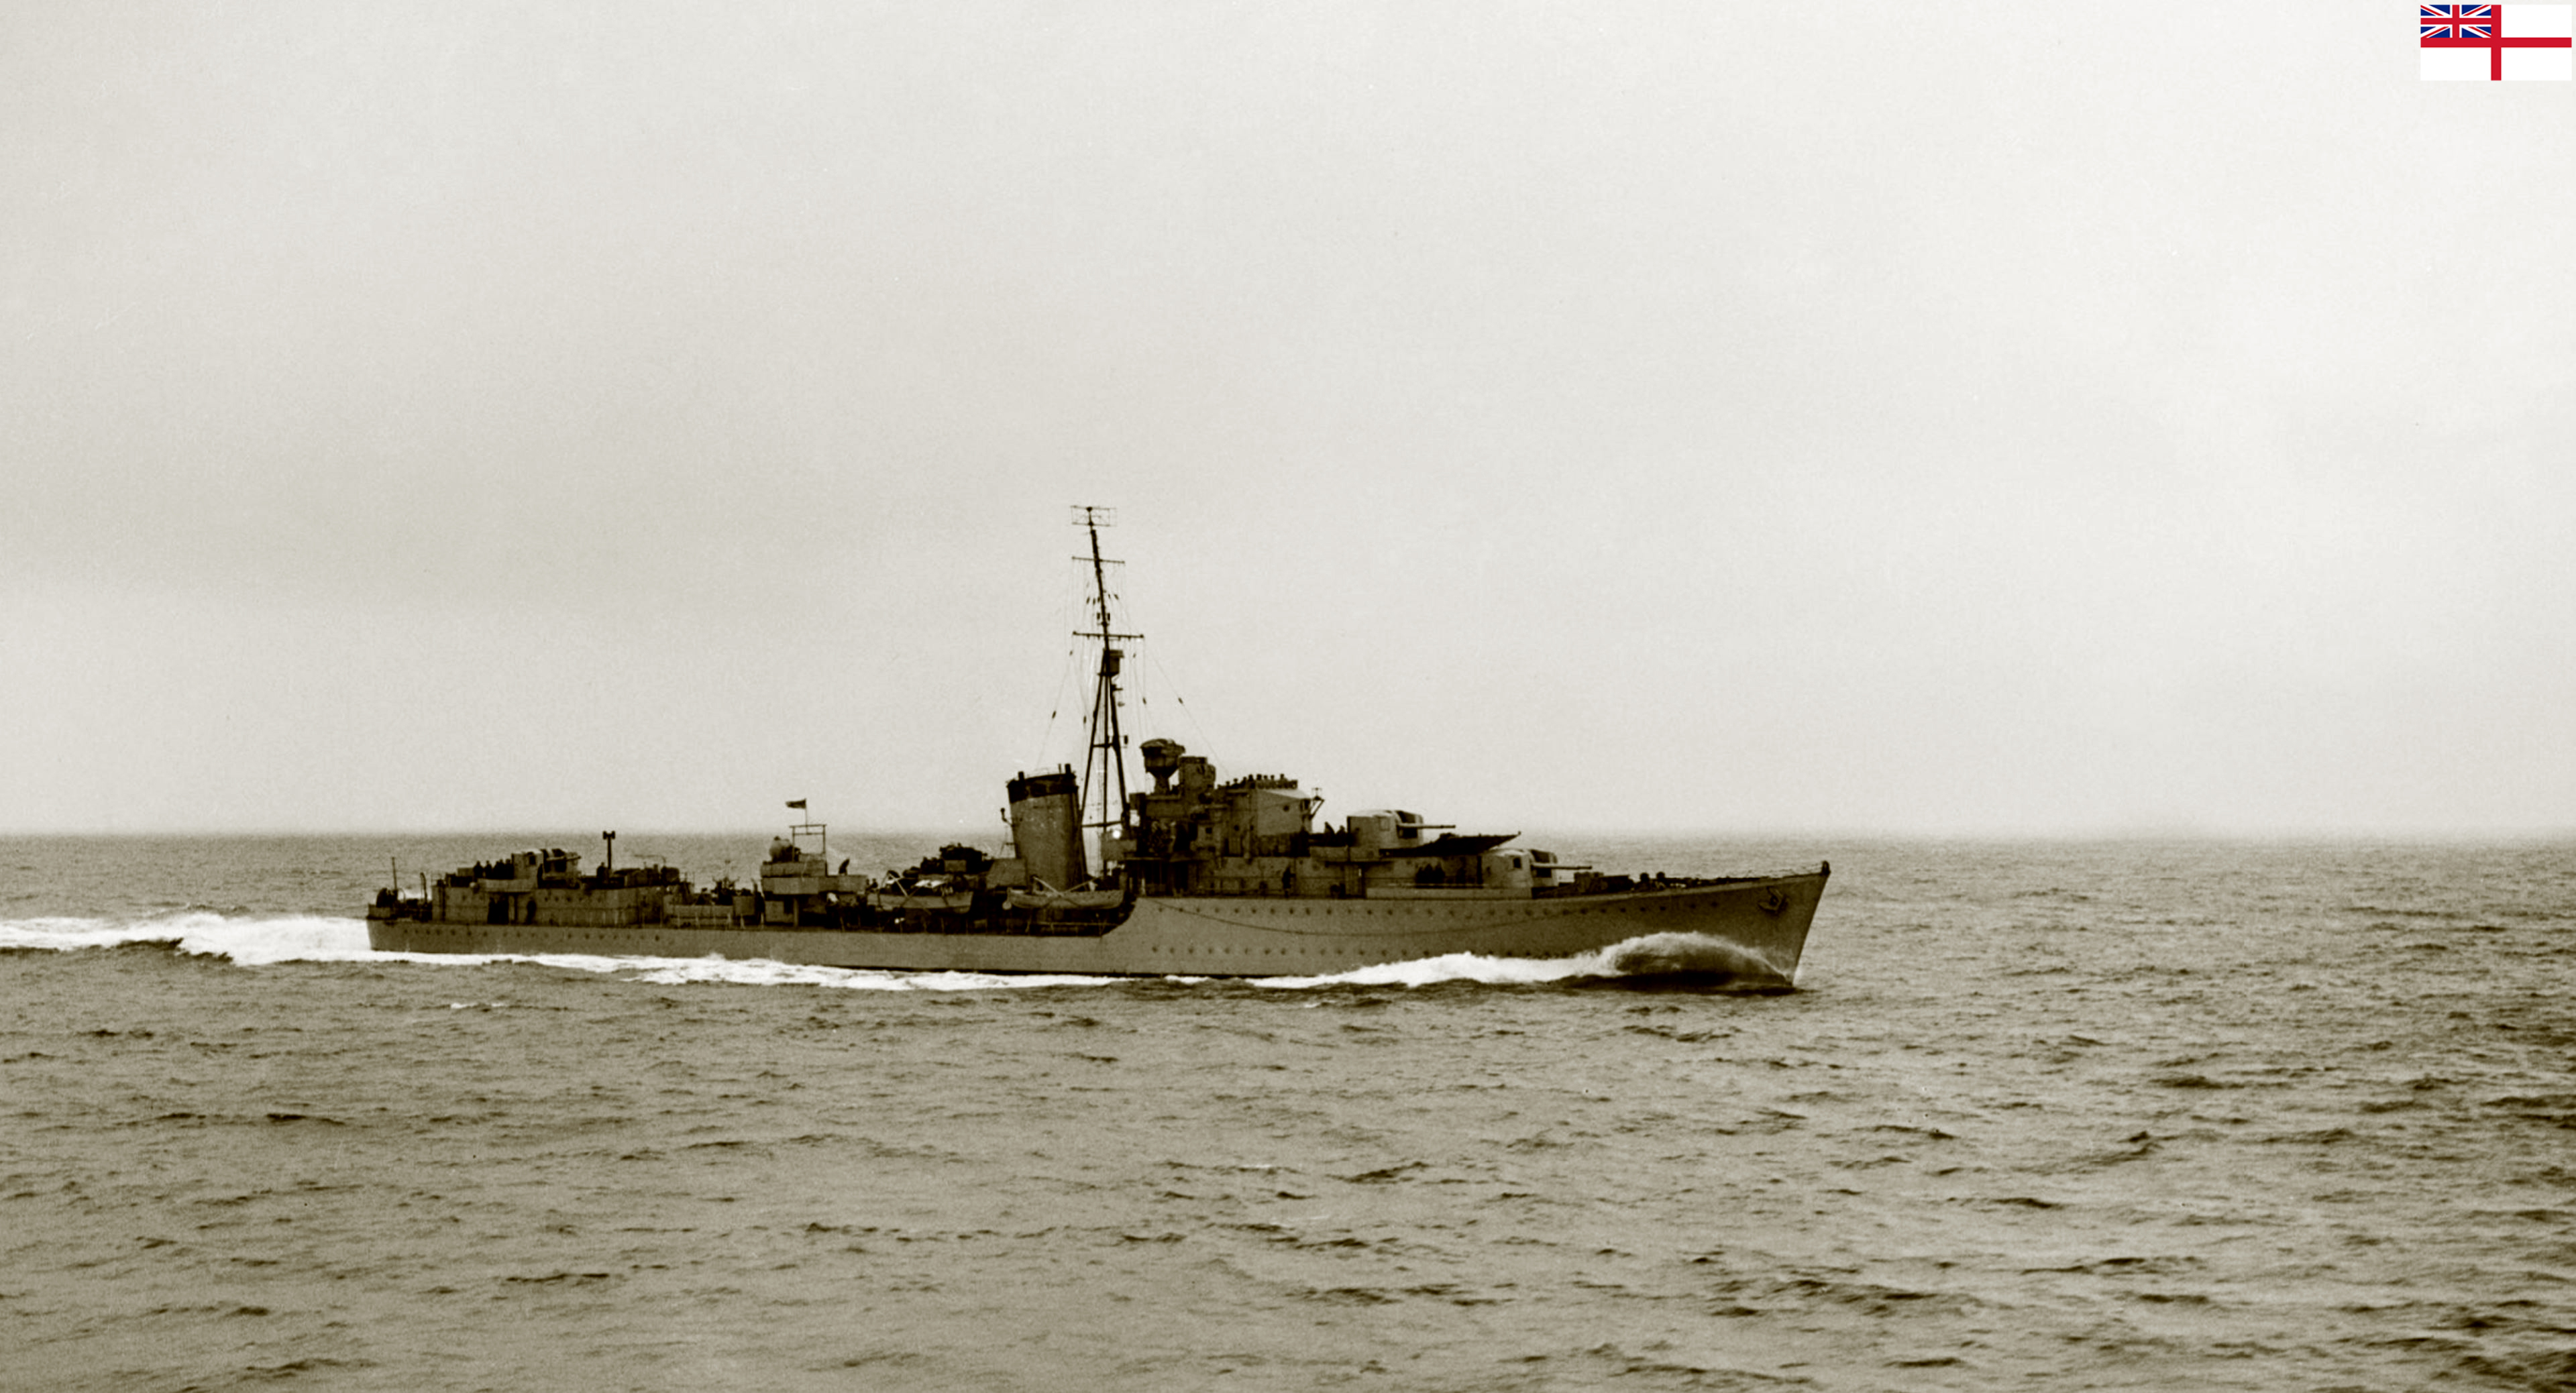 HMS Kelly a K class destroyer built in 1938 was sunk by German aircraft off Crete 23 May 1941 IWM A2787